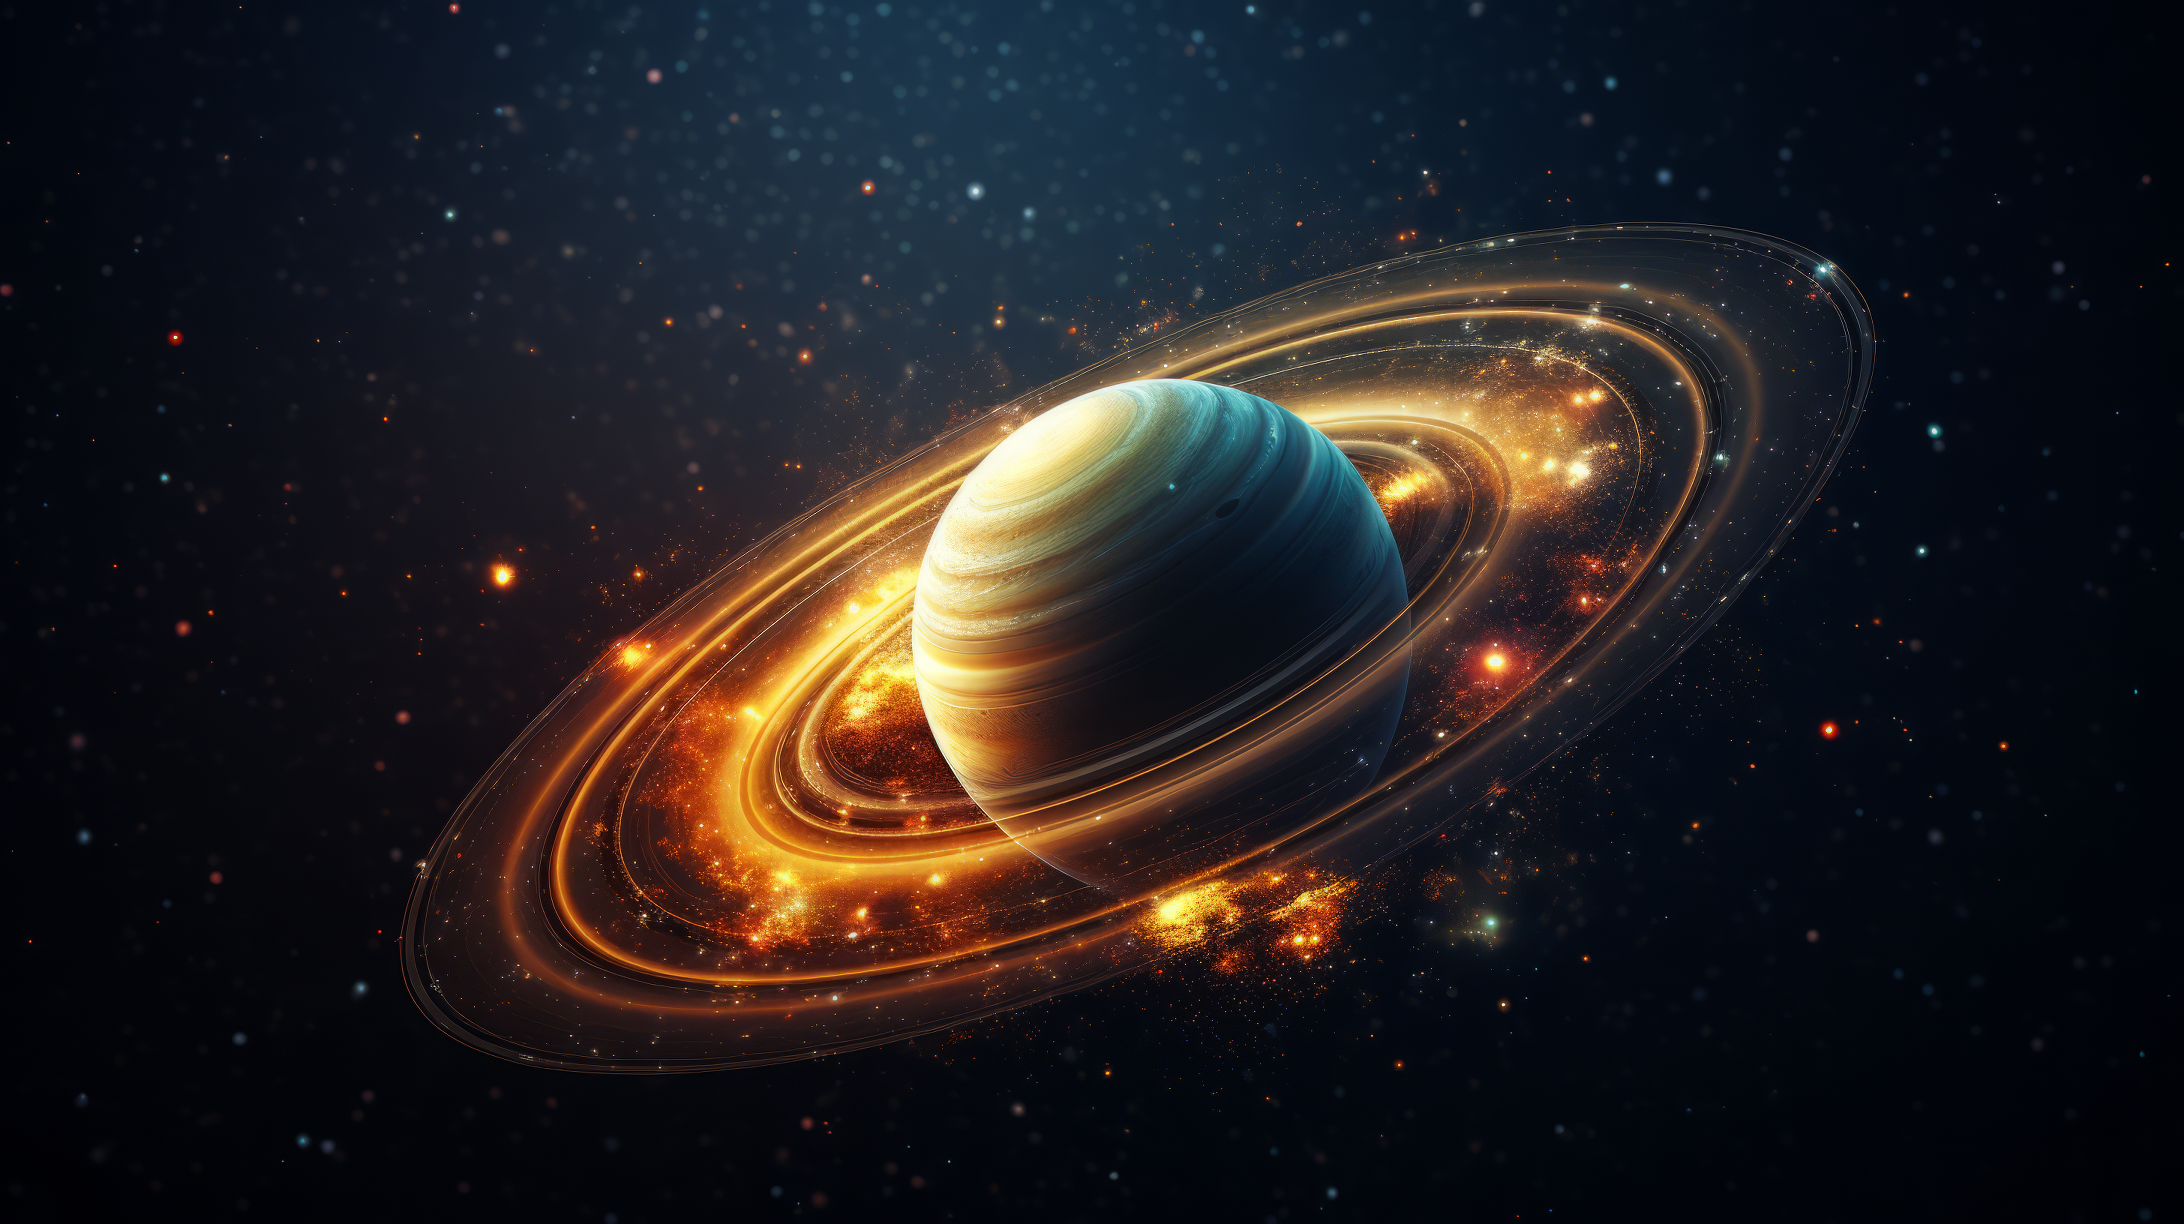 Saturn Planet in Starry Galaxy Wallpaper by patrika